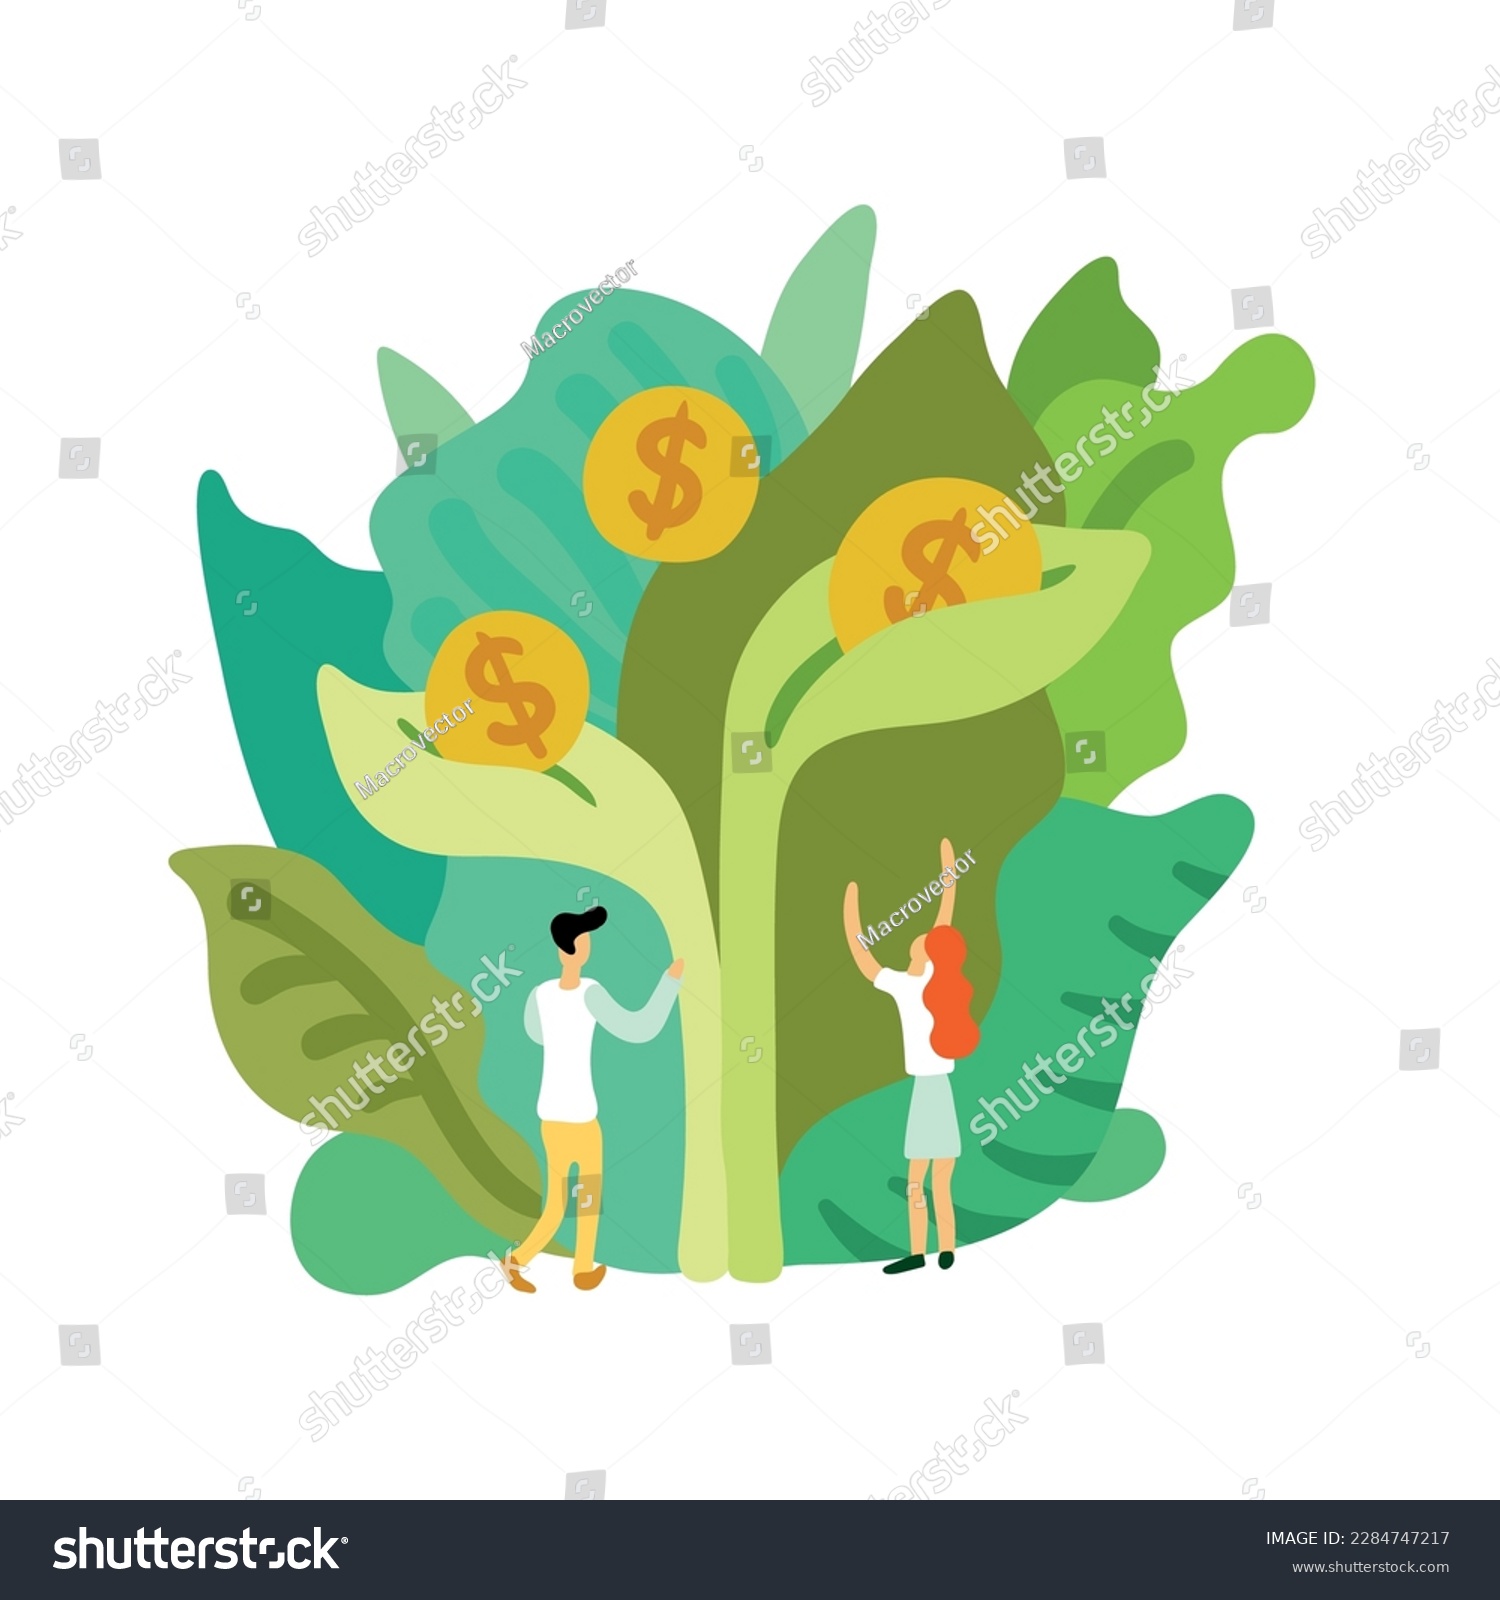 Ecological restoration flat composition with coins on sprout leaves vector illustration #2284747217